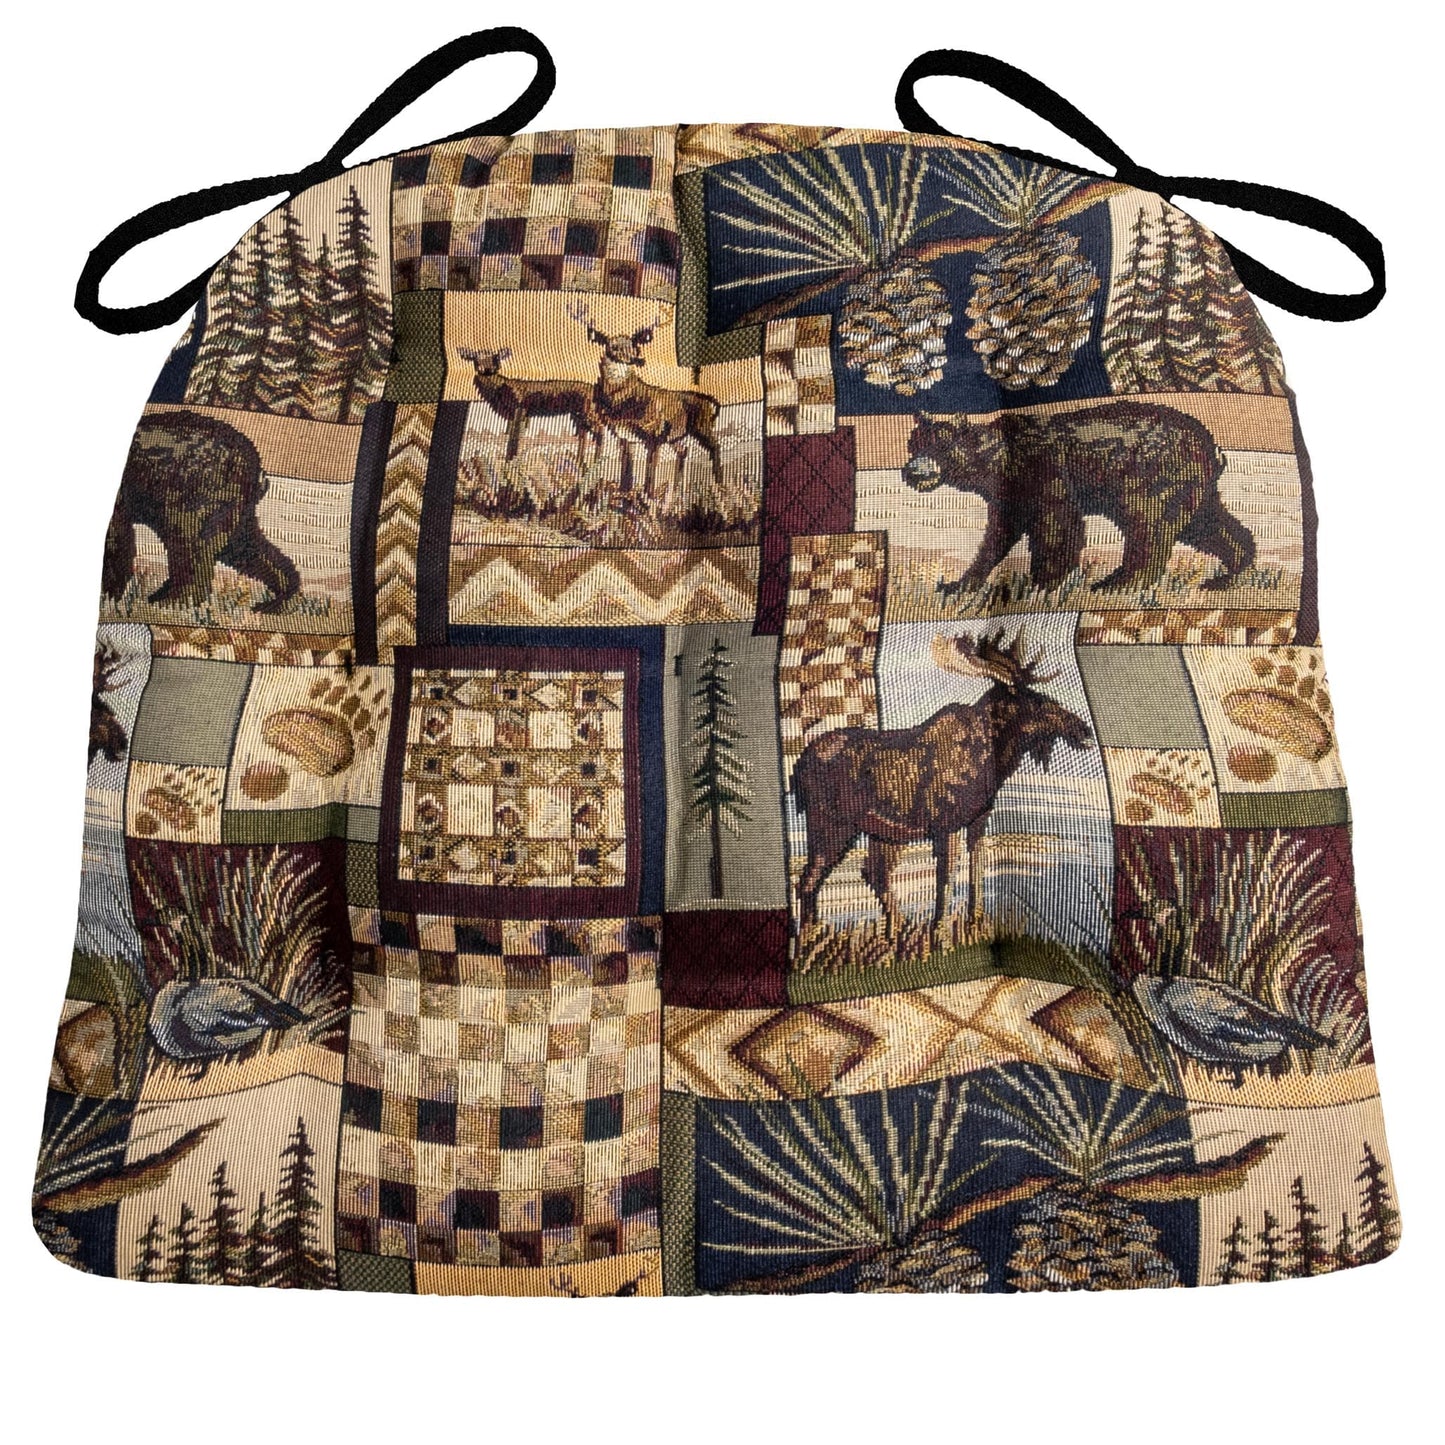 Woodlands Peters Cabin Dining Chair Pads - Barnett Home Decor - Taupe, Brown, & Black - Animals - Nature - Wildlife - Bears - Moose - Deer - Rustic - Hunting - Fishing - Cabin